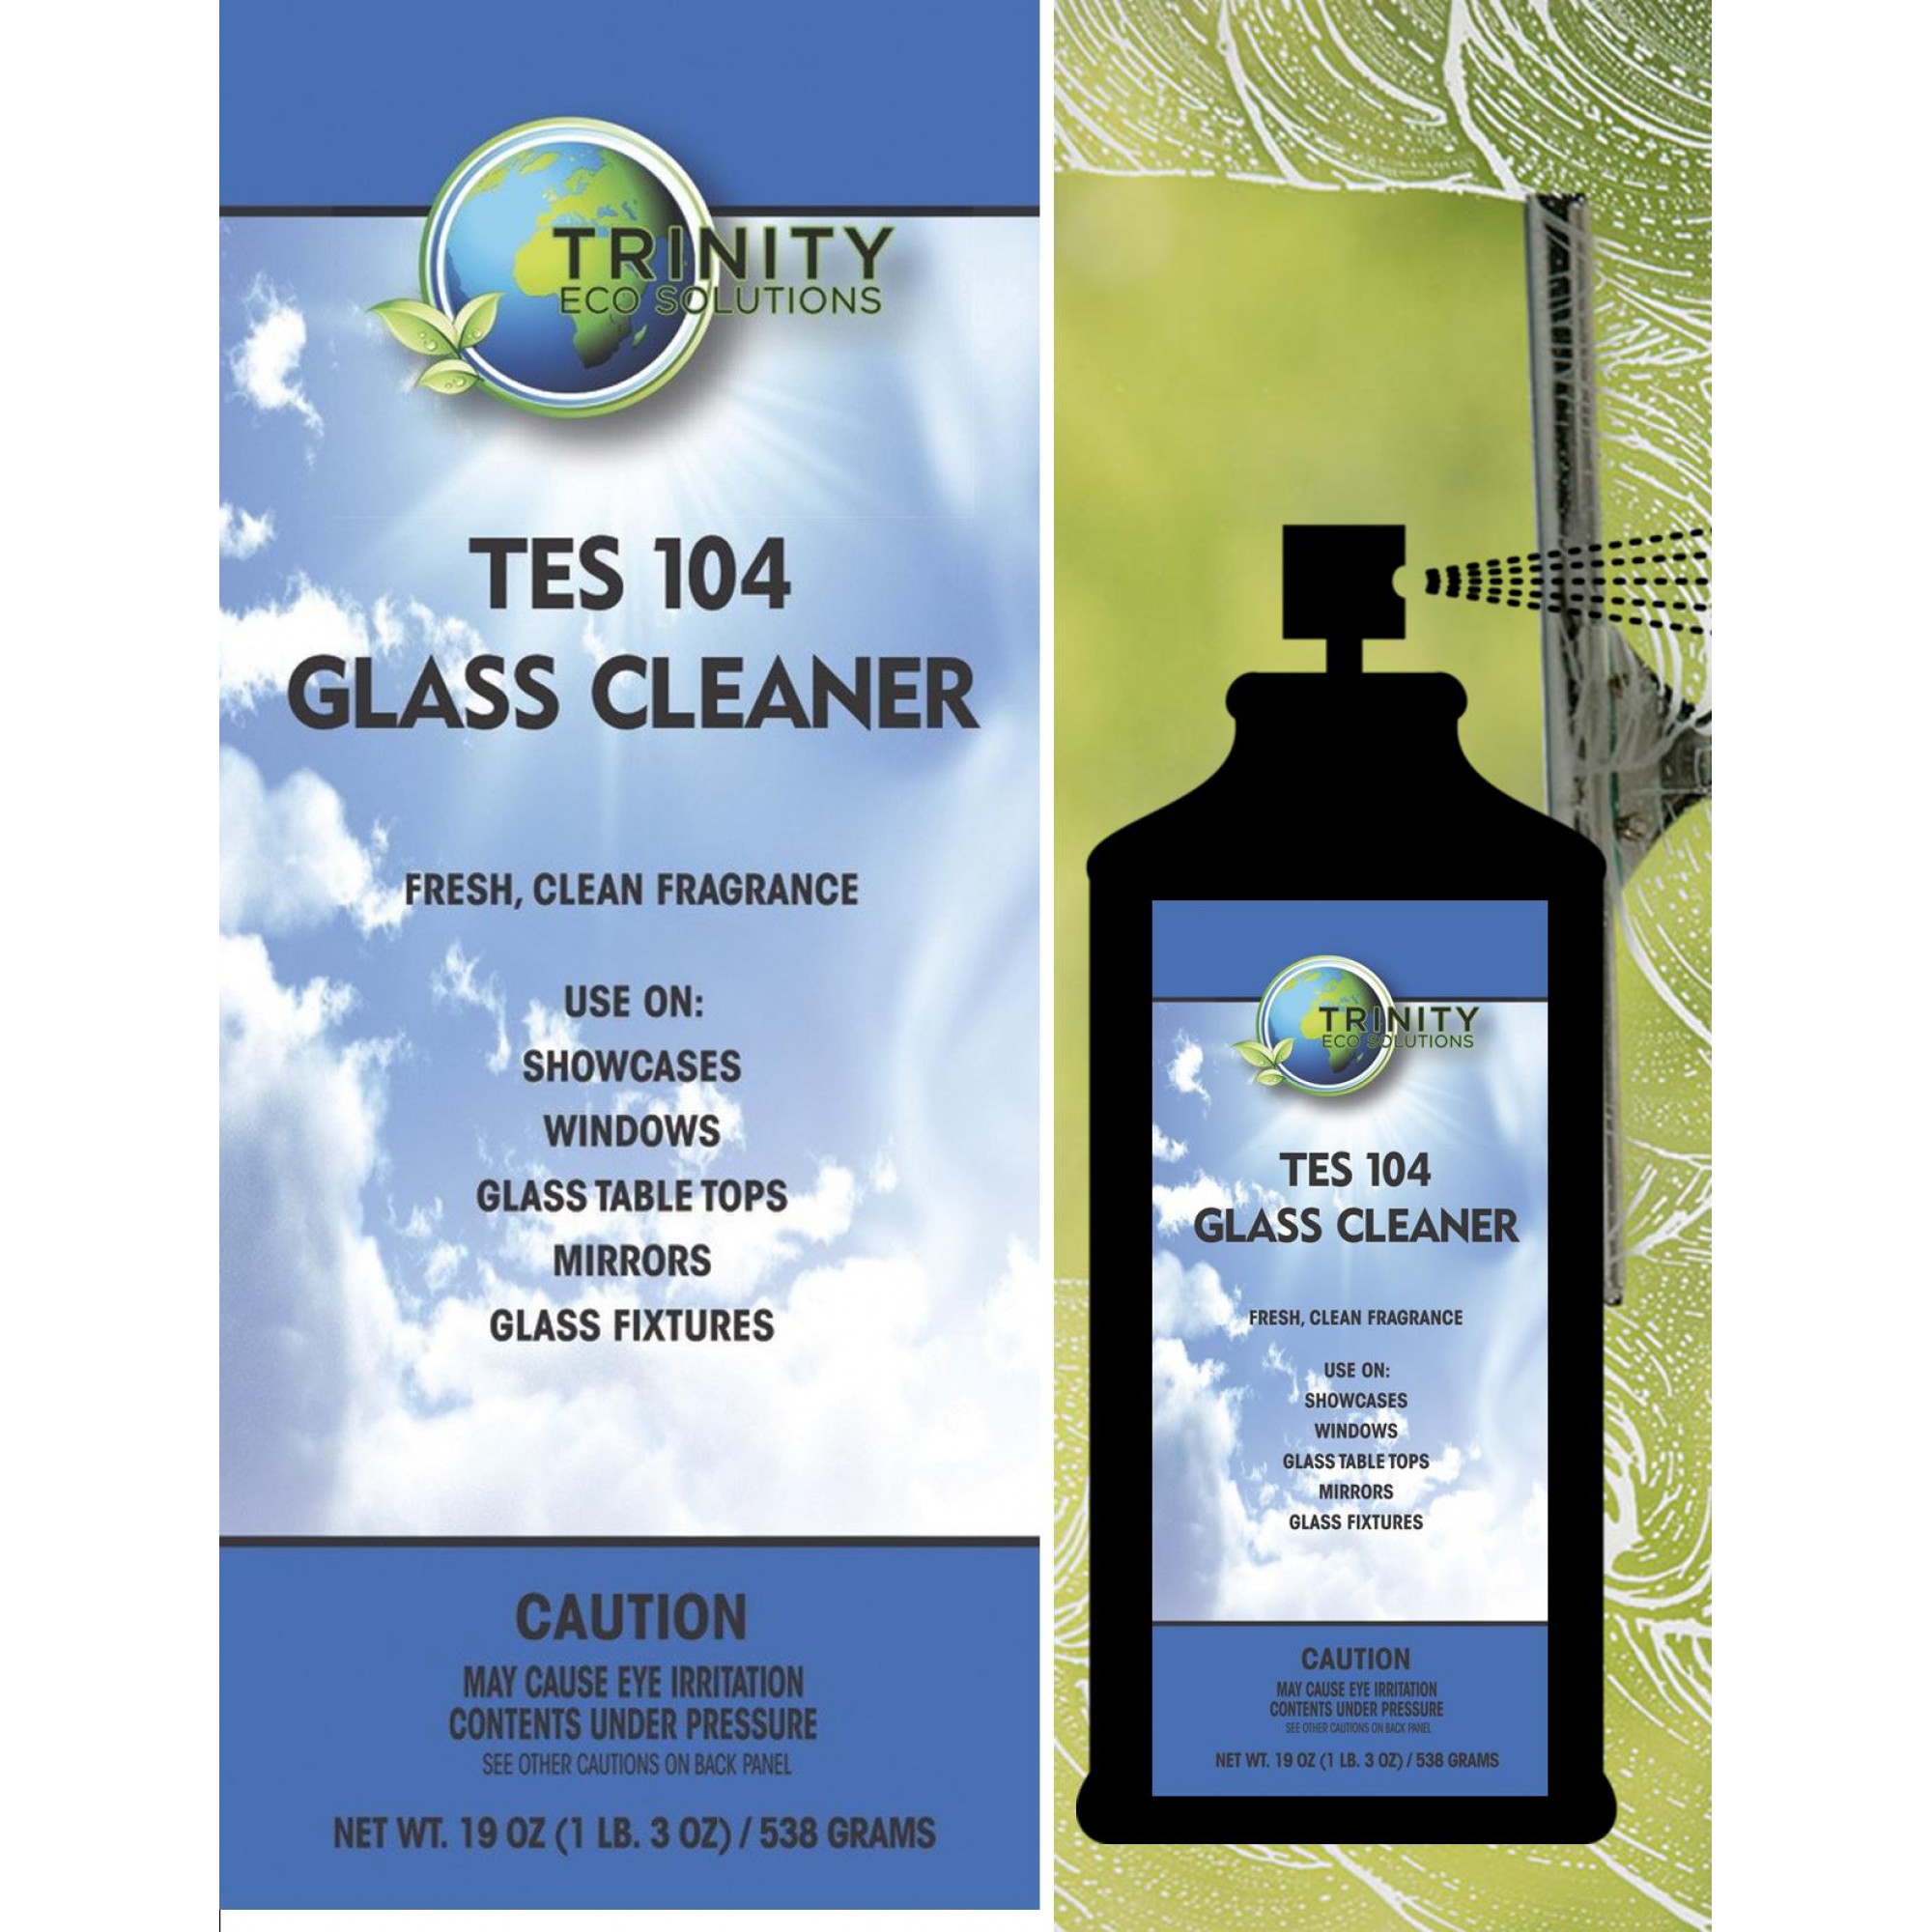 TES 104 Glass Cleaner